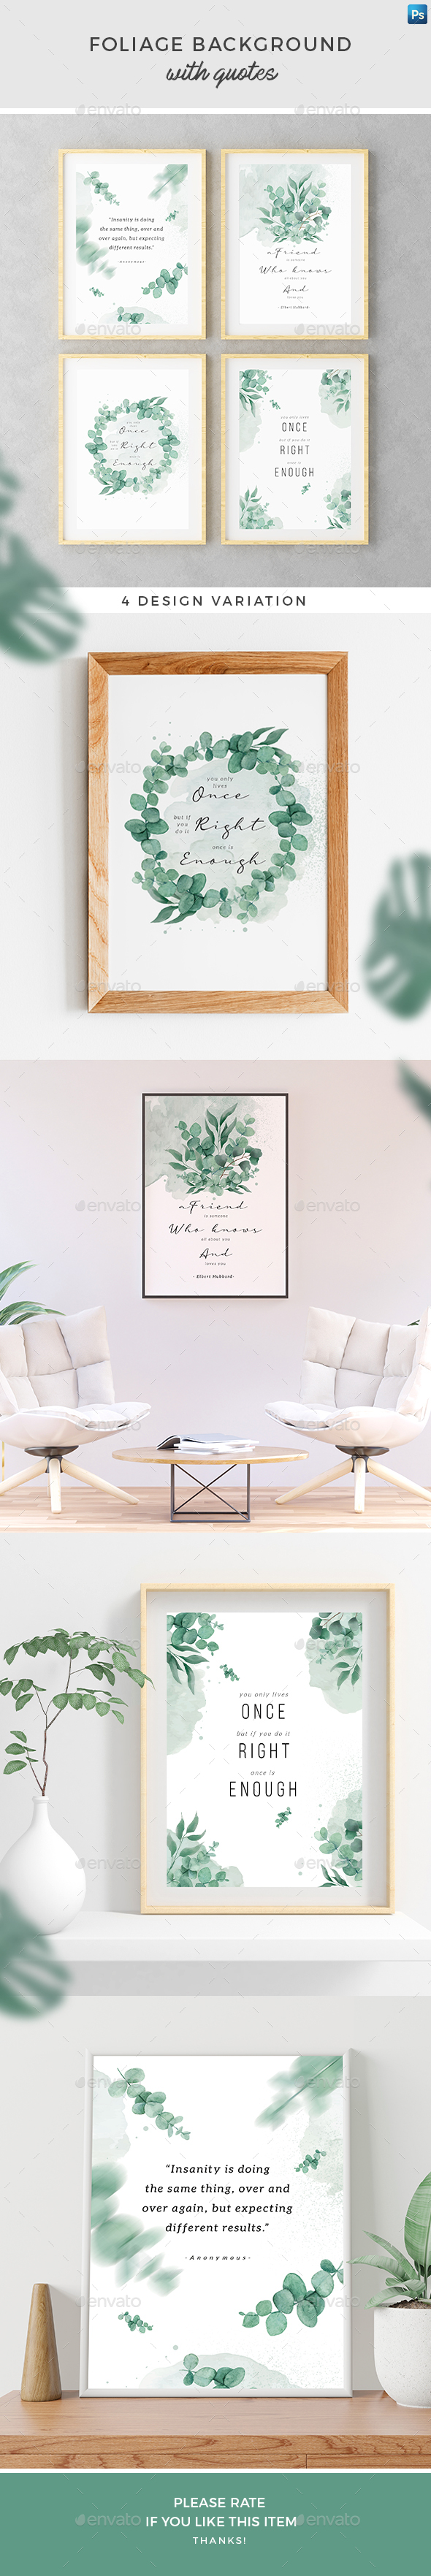 Watercolor Foliage Background With Quotes